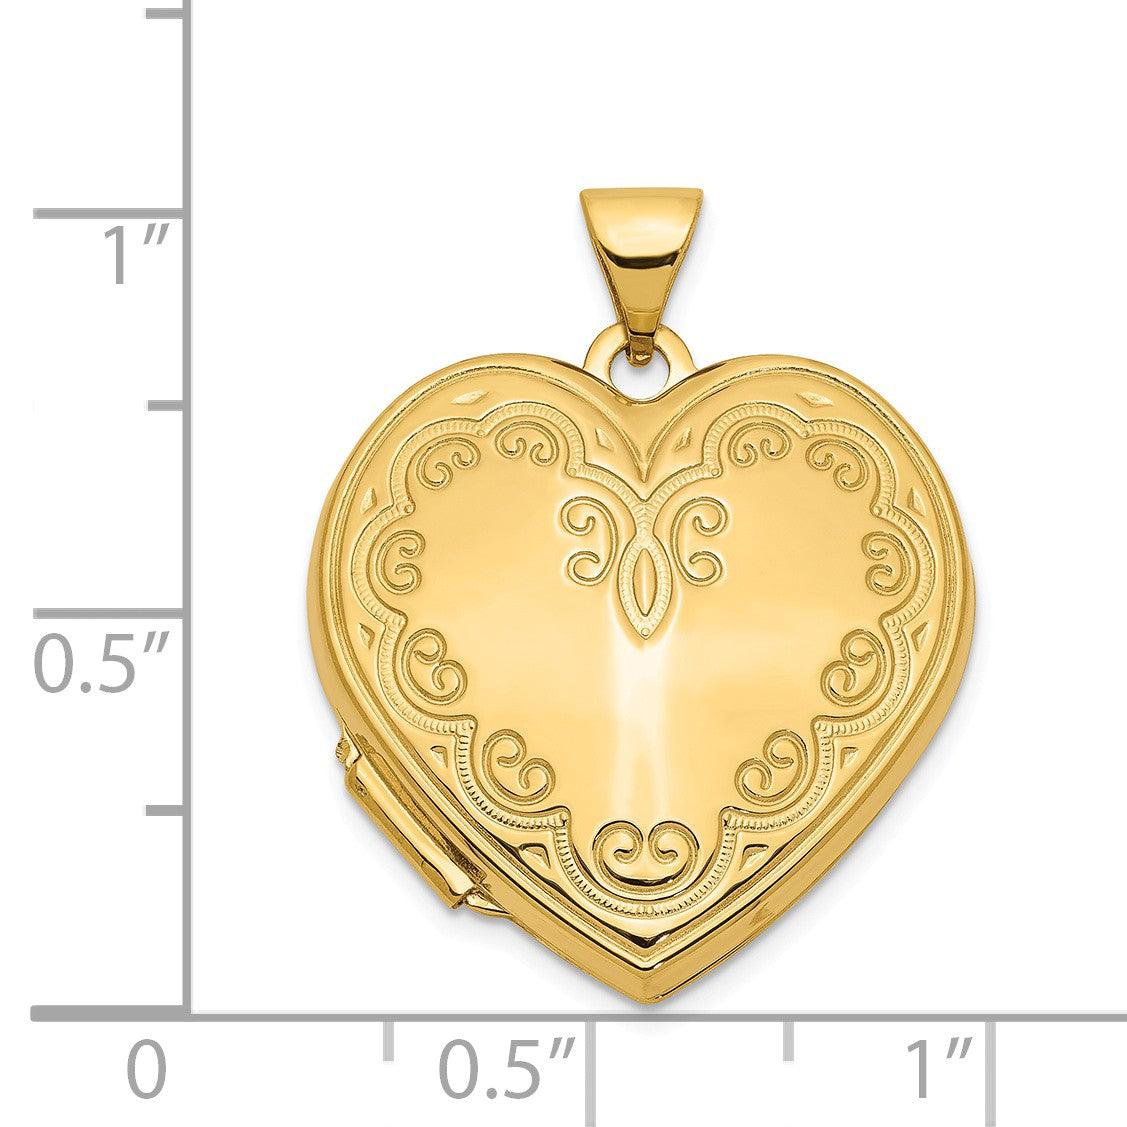 Alternate view of the 14k Yellow Gold 21mm Ornate Heart Locket by The Black Bow Jewelry Co.